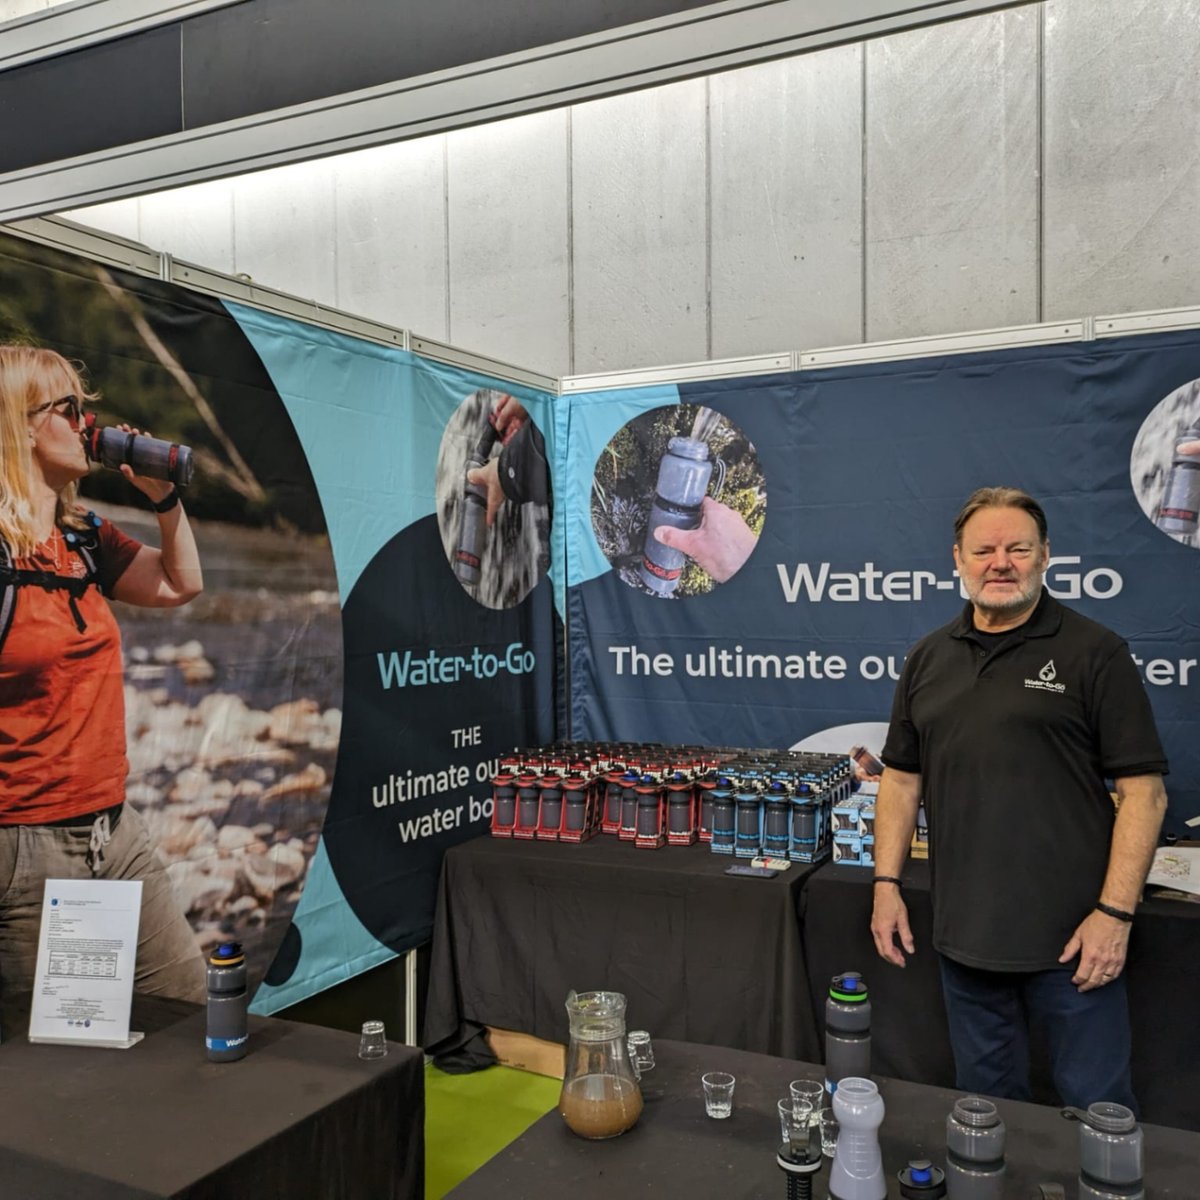 Caught in the wild at the National Outdoor Show! 🌿 Dave was spreading the word and mingling with fellow nature buffs who are just as hyped about keeping our wilderness pristine as we are. #AdventureAwaits #NationalOutdoorShow #NatureLovers #TravelEssential